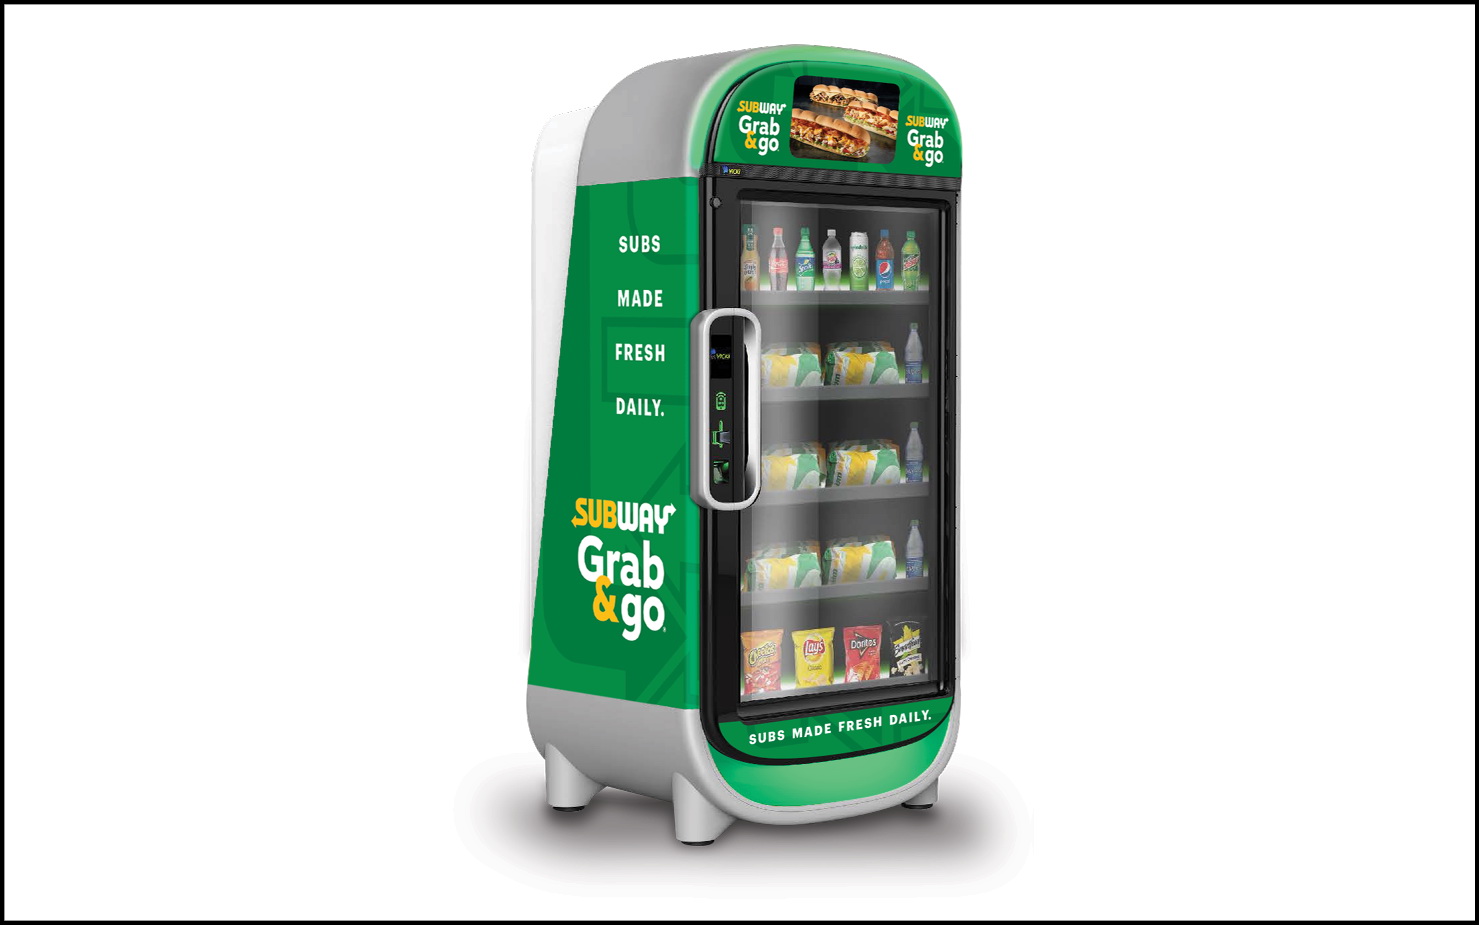 Subway's New Vending Machine Listens to What You Say and Answers Your Questions

